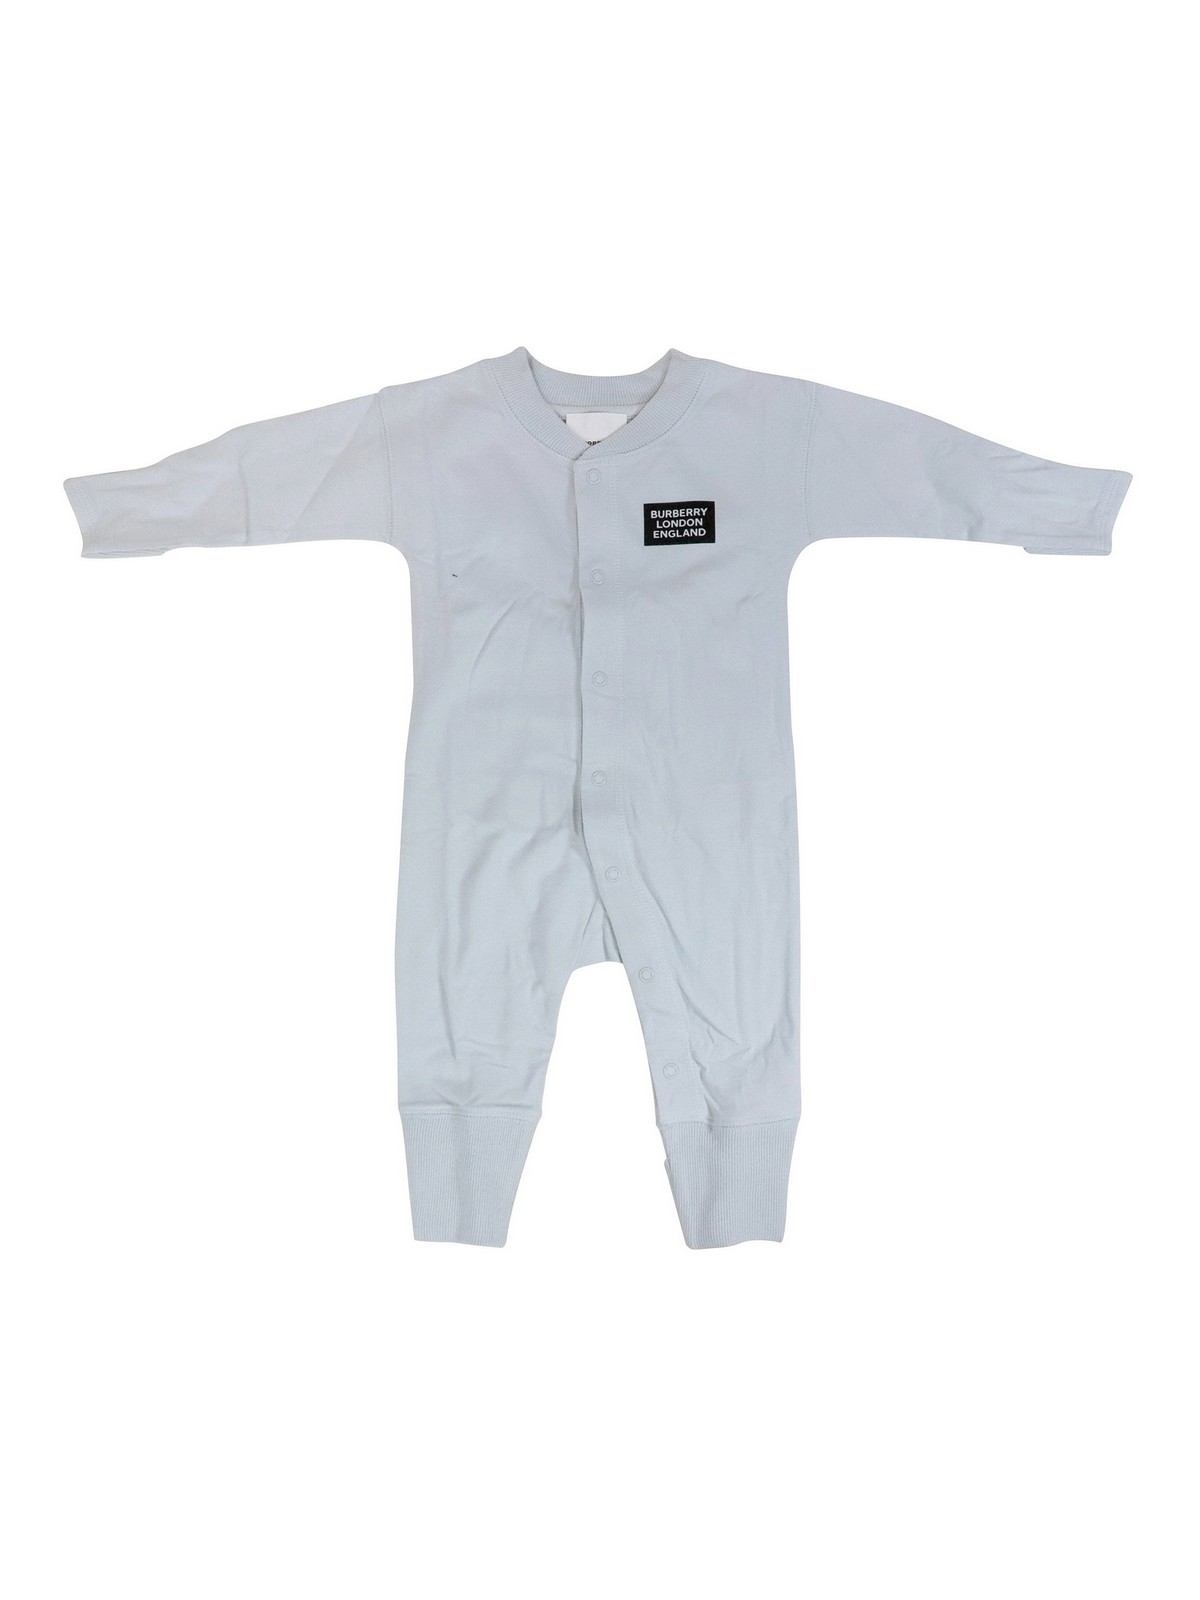 burberry baby outlet online shop